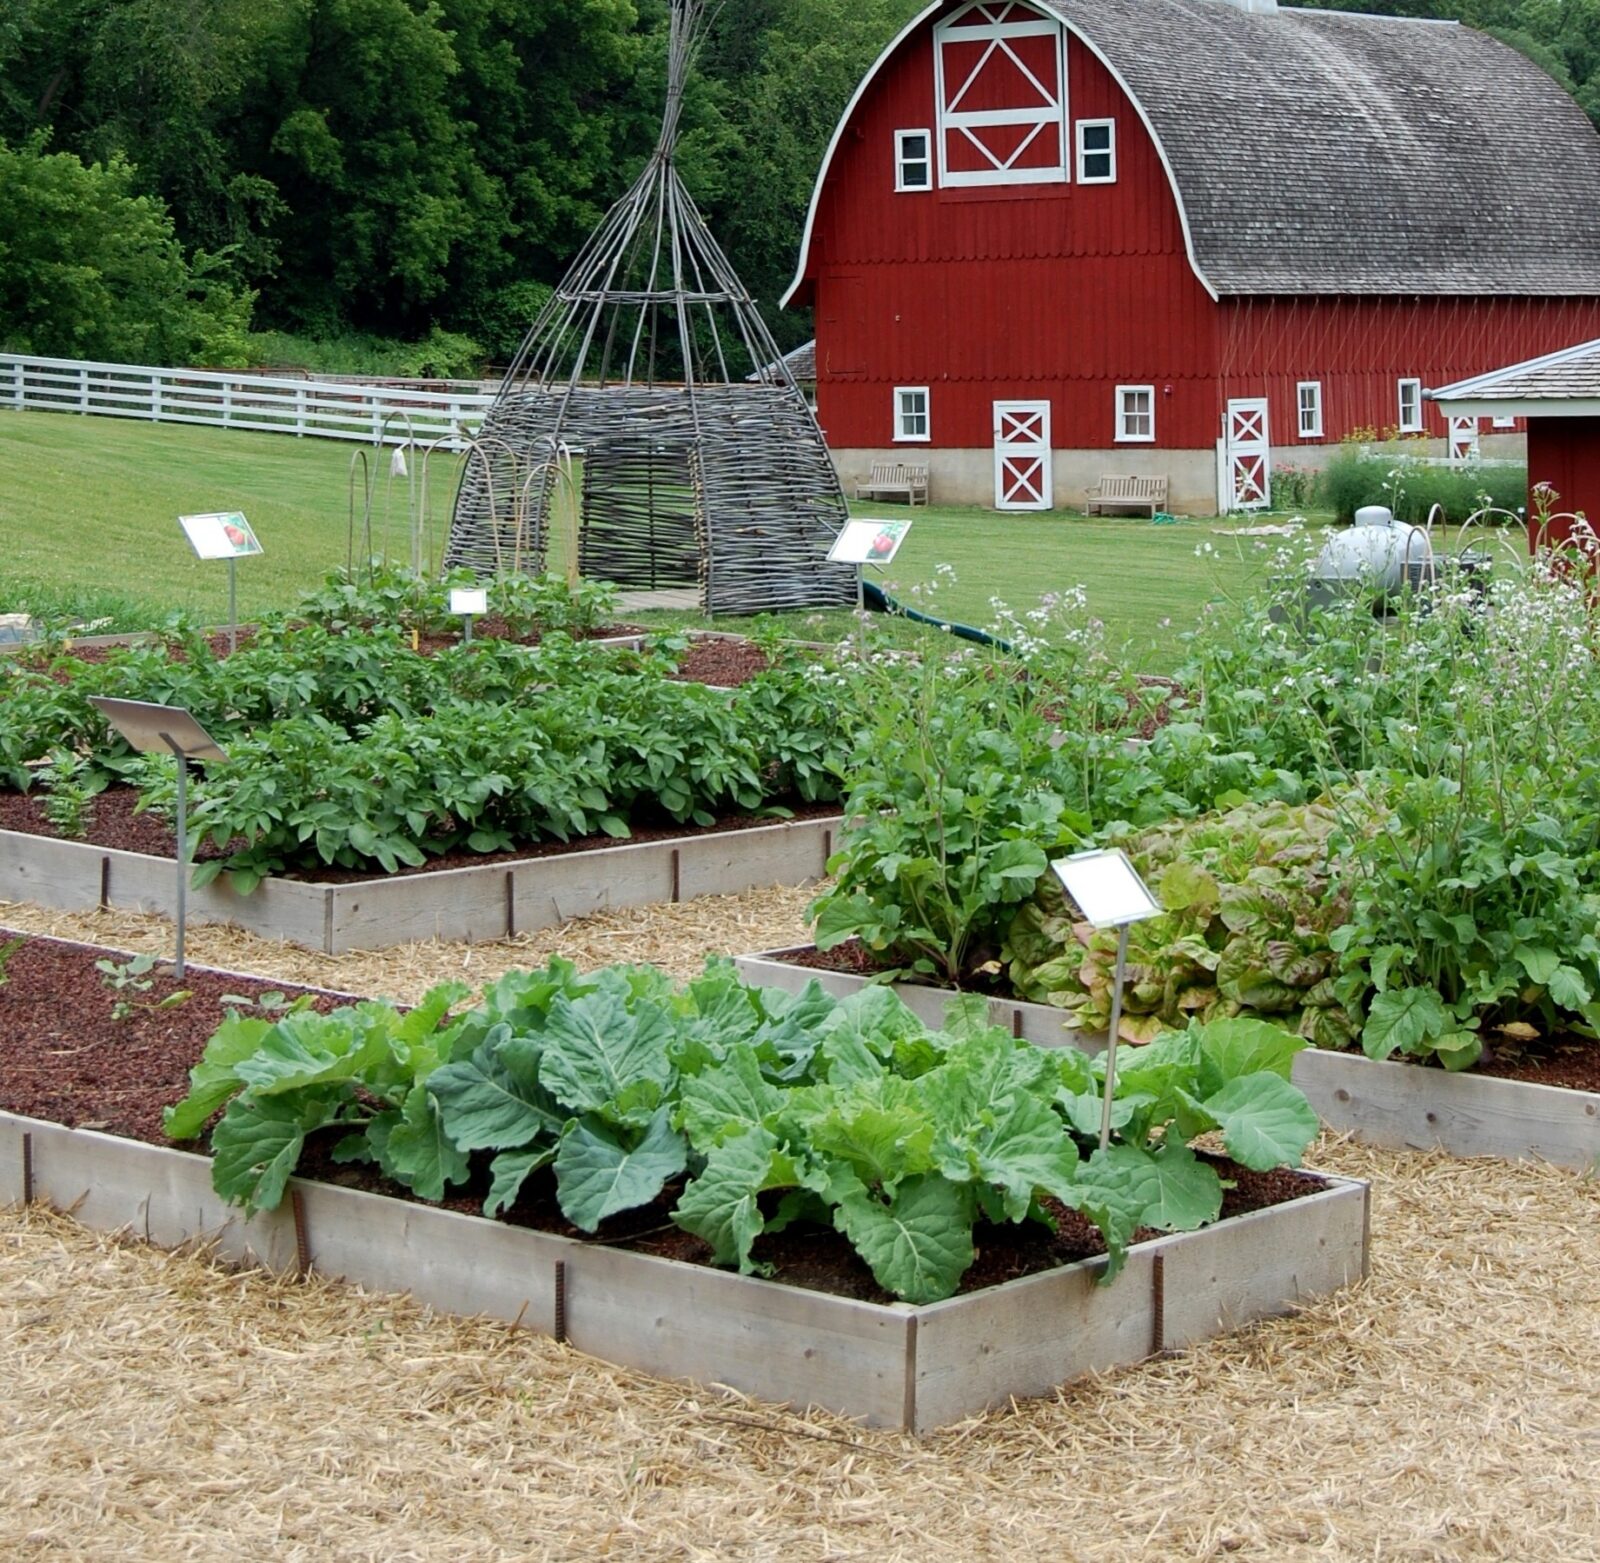 Three raised garden beds with many green plants with a teepee and barn in the background